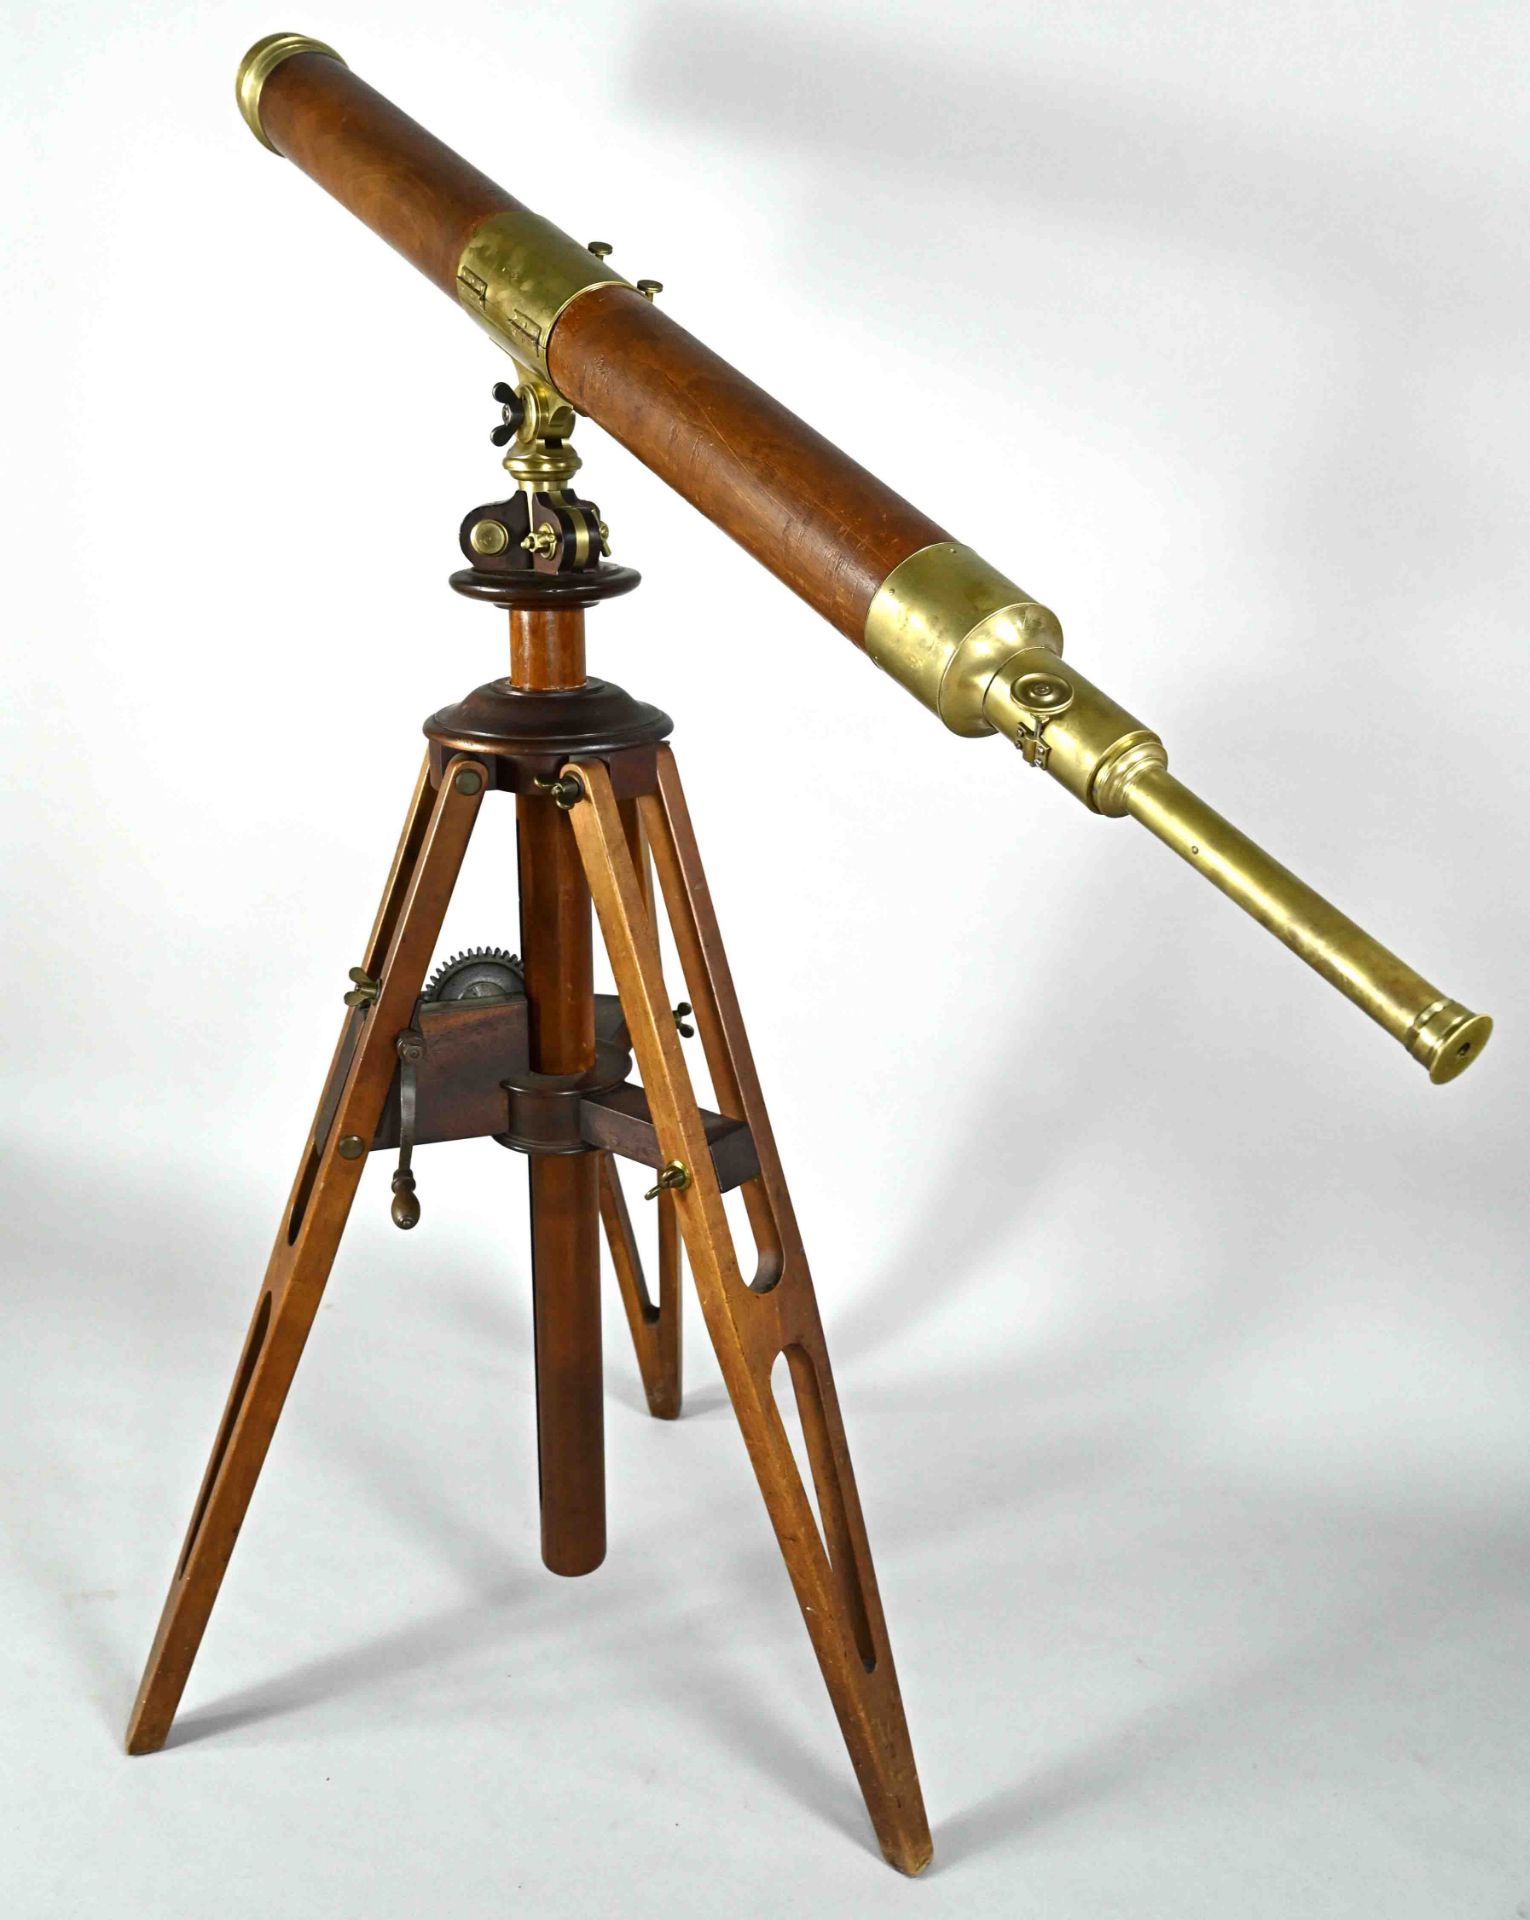 Large telescope on tripod, Germany, mid-19th century, Woerle & brothers von Ruedorffer, walnut and  - Image 4 of 5